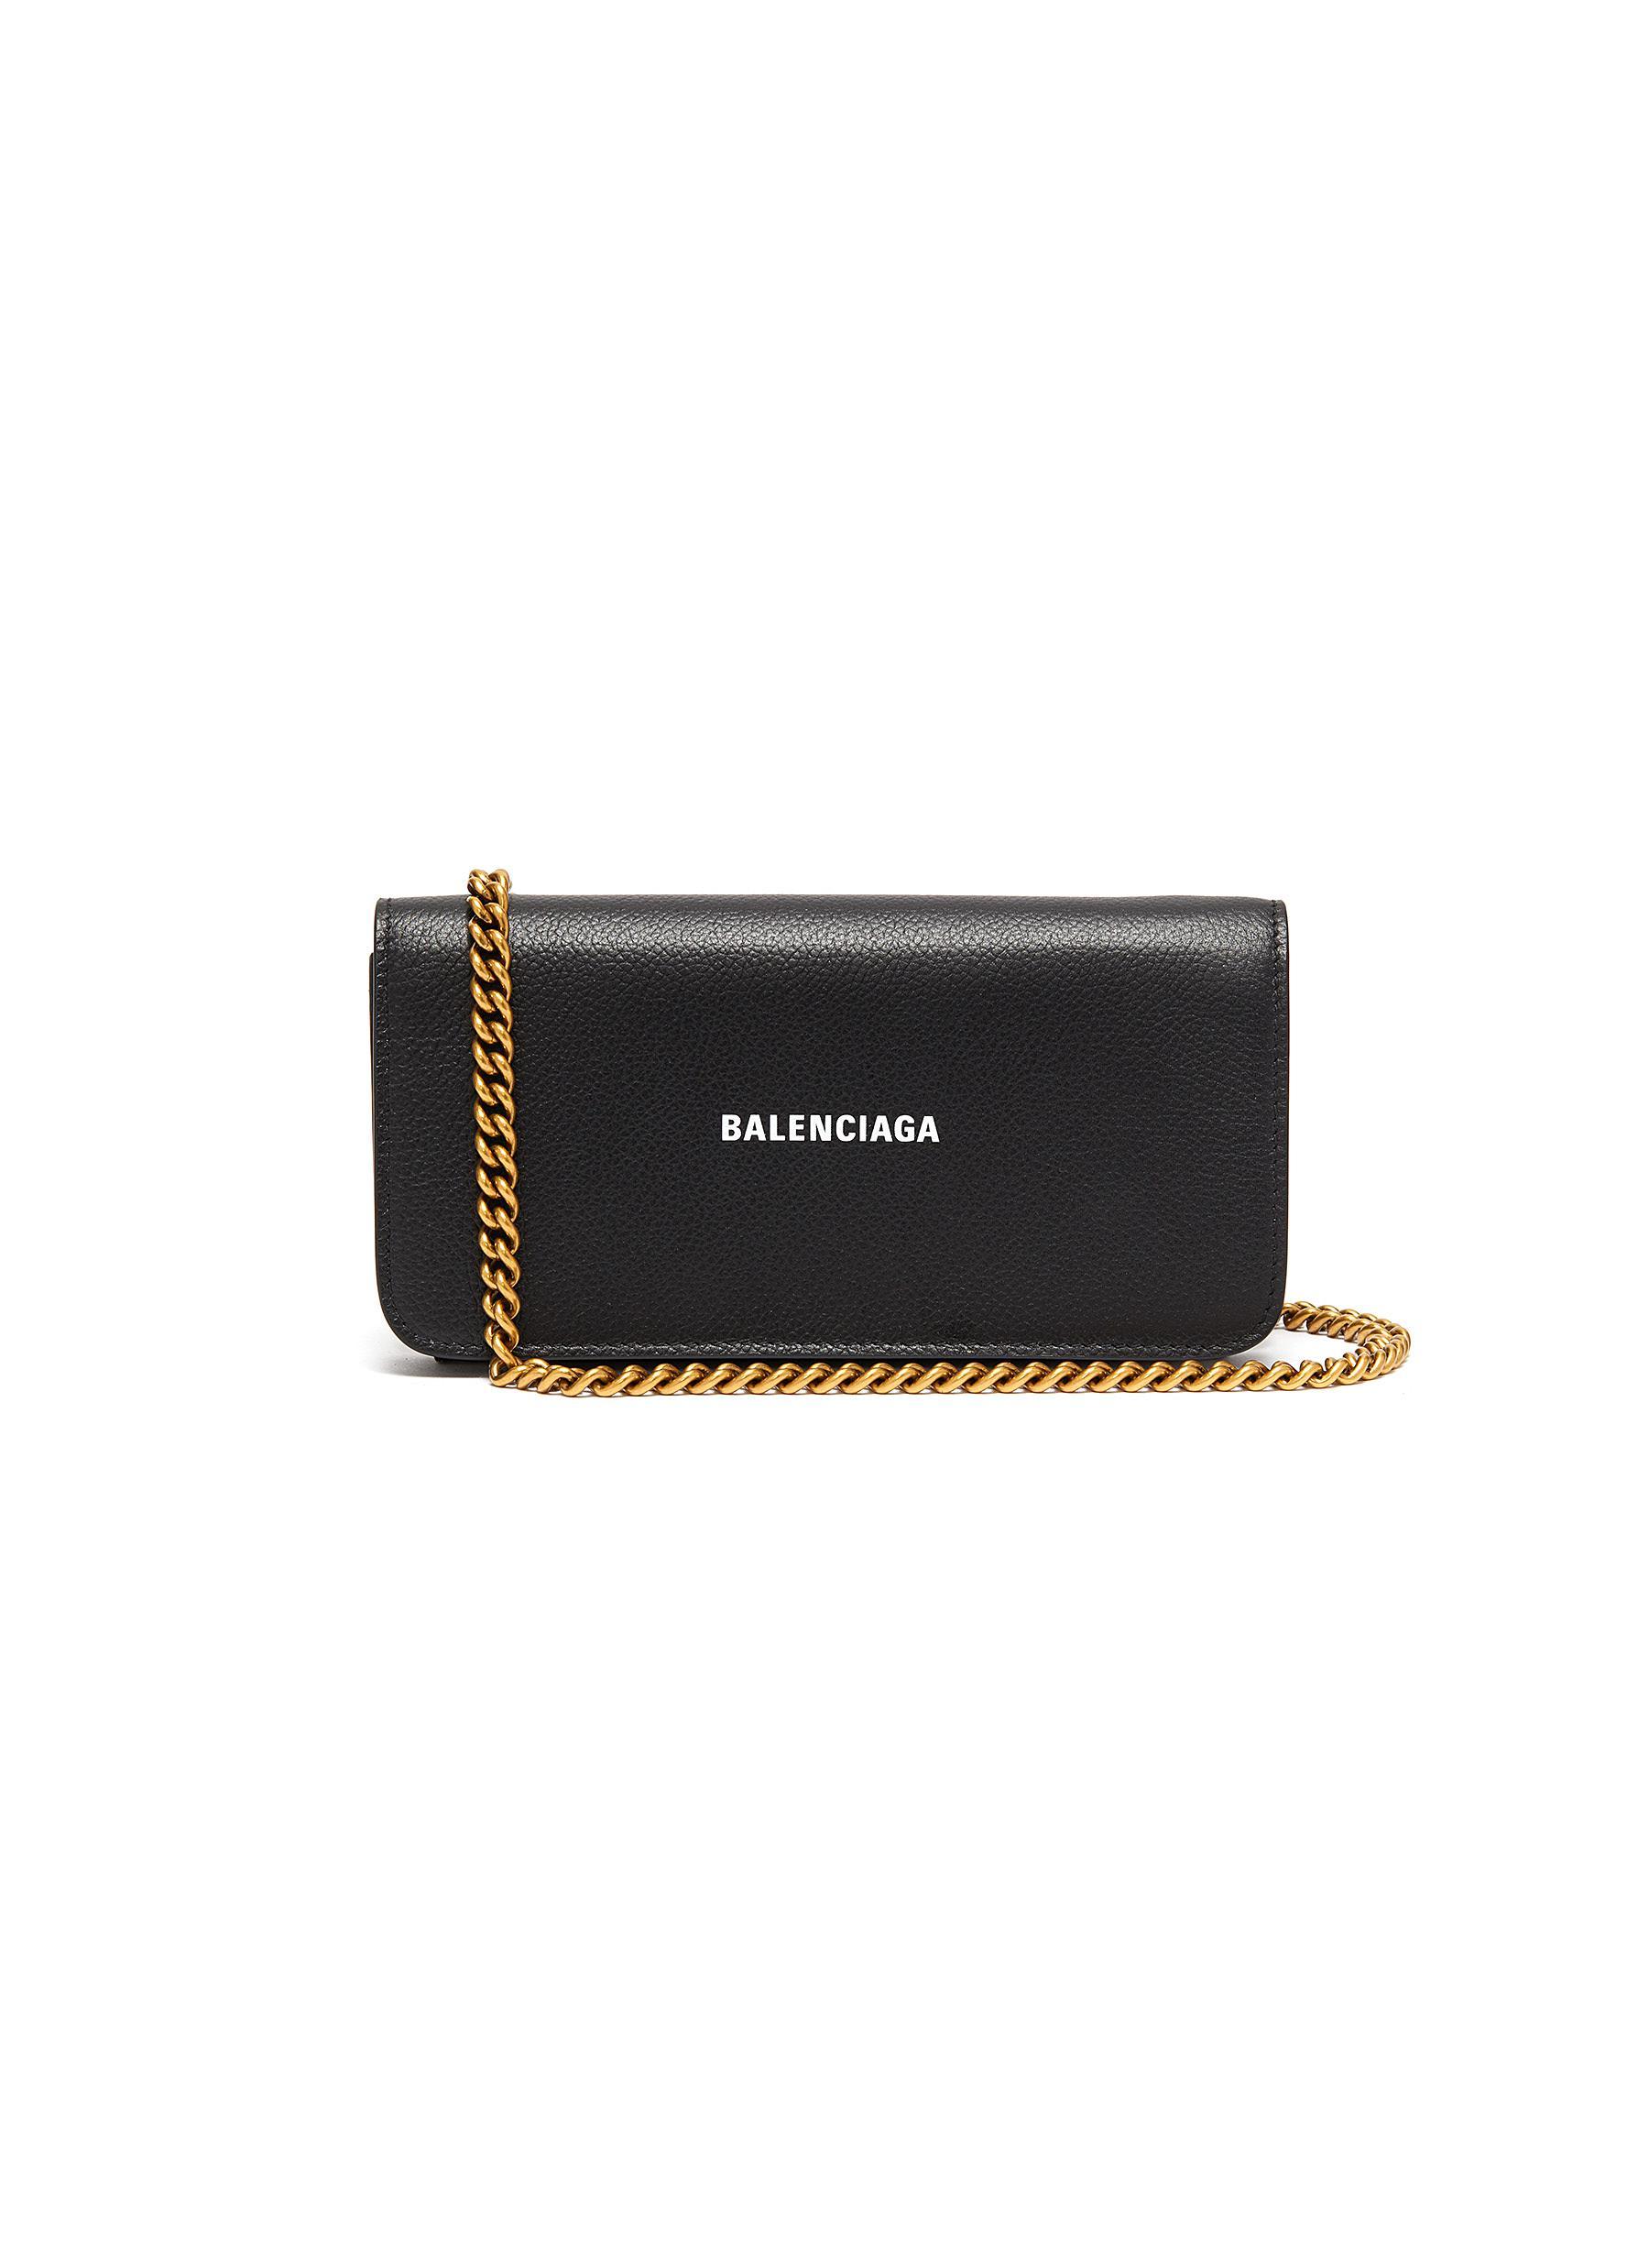 Balenciaga 'cash Continental' Leather Wallet On Chain in Black - Lyst